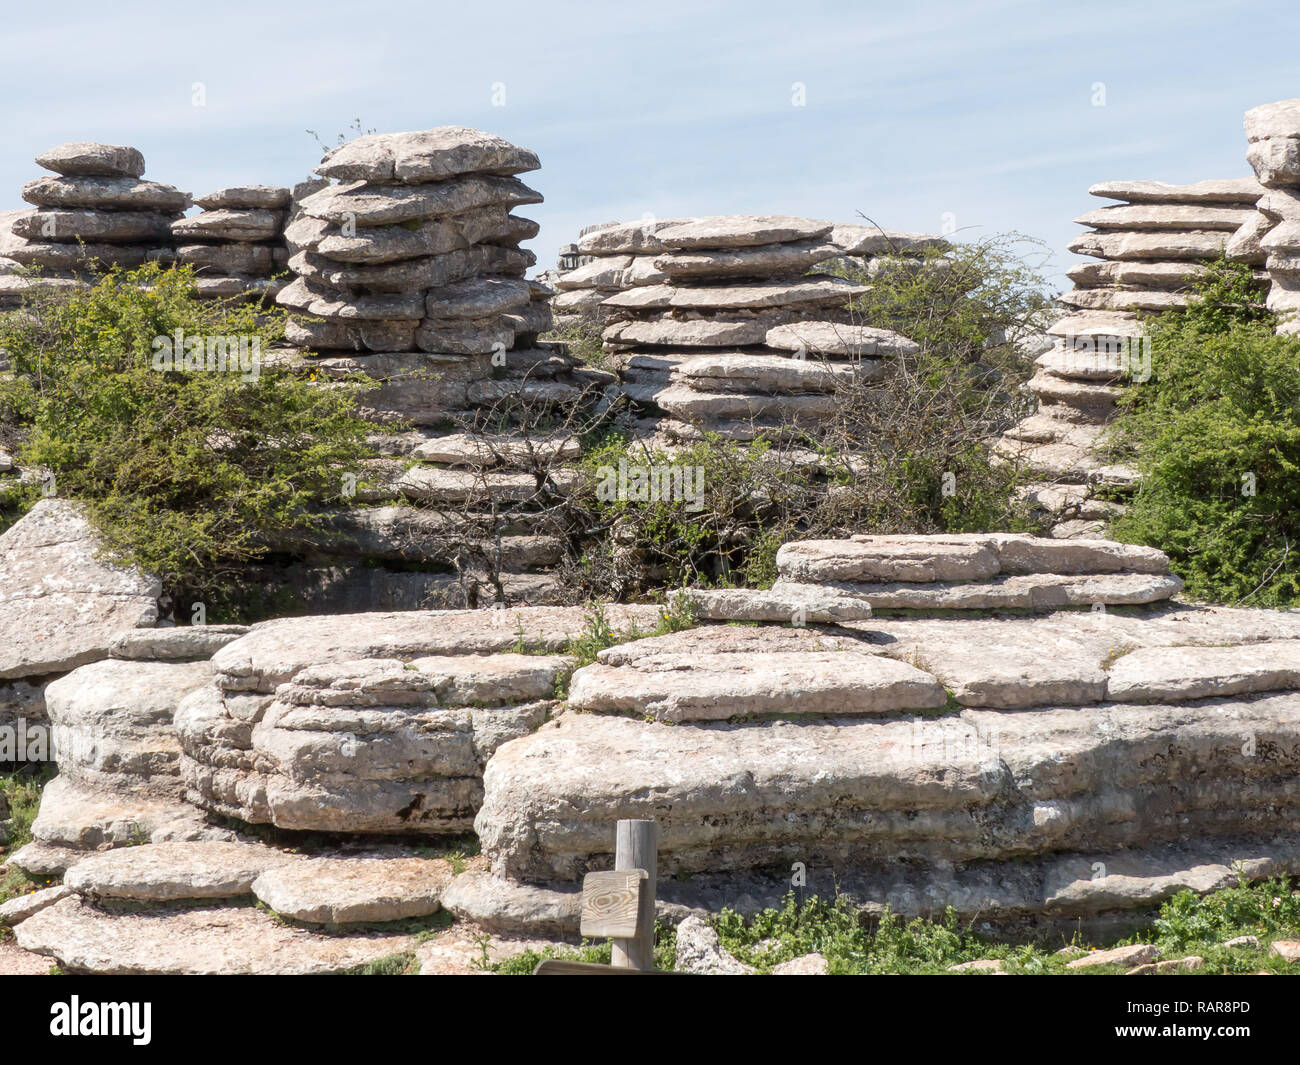 Andalucia in Spain: strange rock formations in the Torcal de Antequera natural park Stock Photo